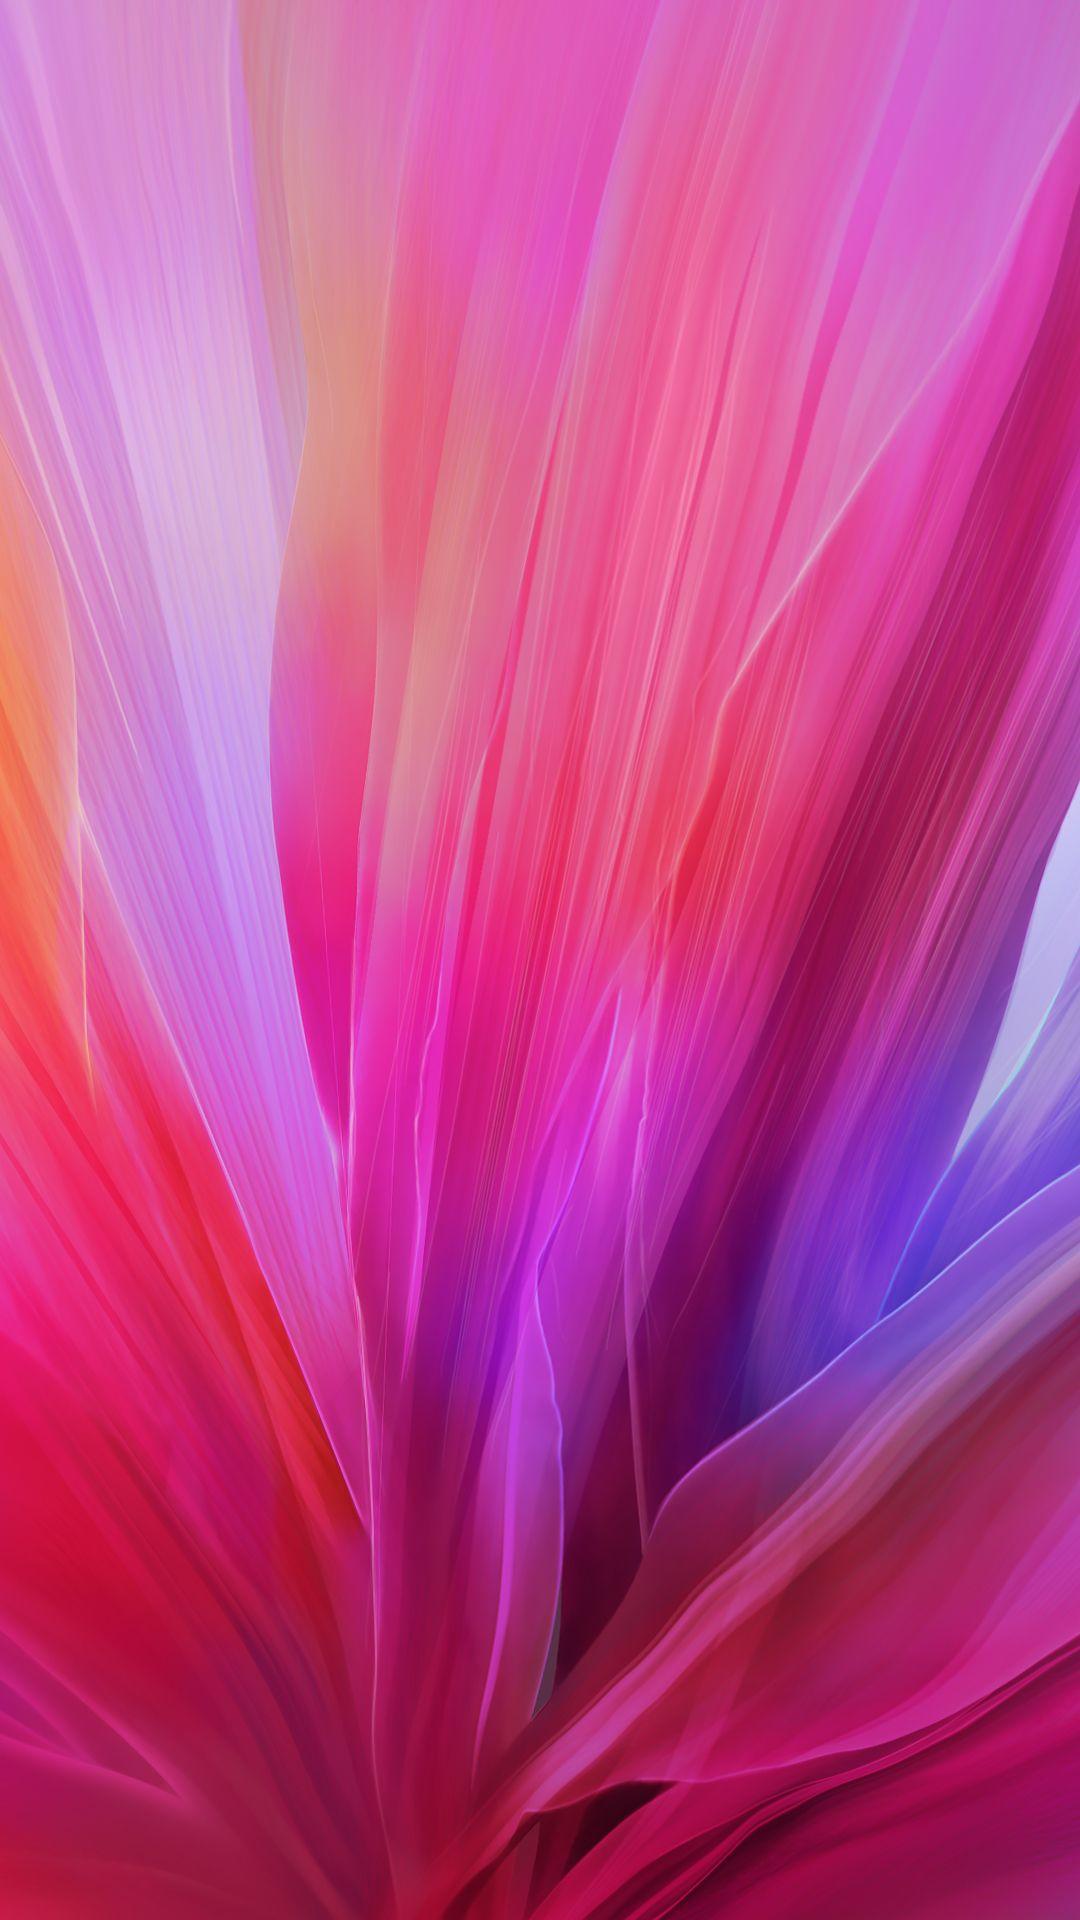 Sony Xperia Z5 Wallpaper with Abstract Colorful Background. Pink